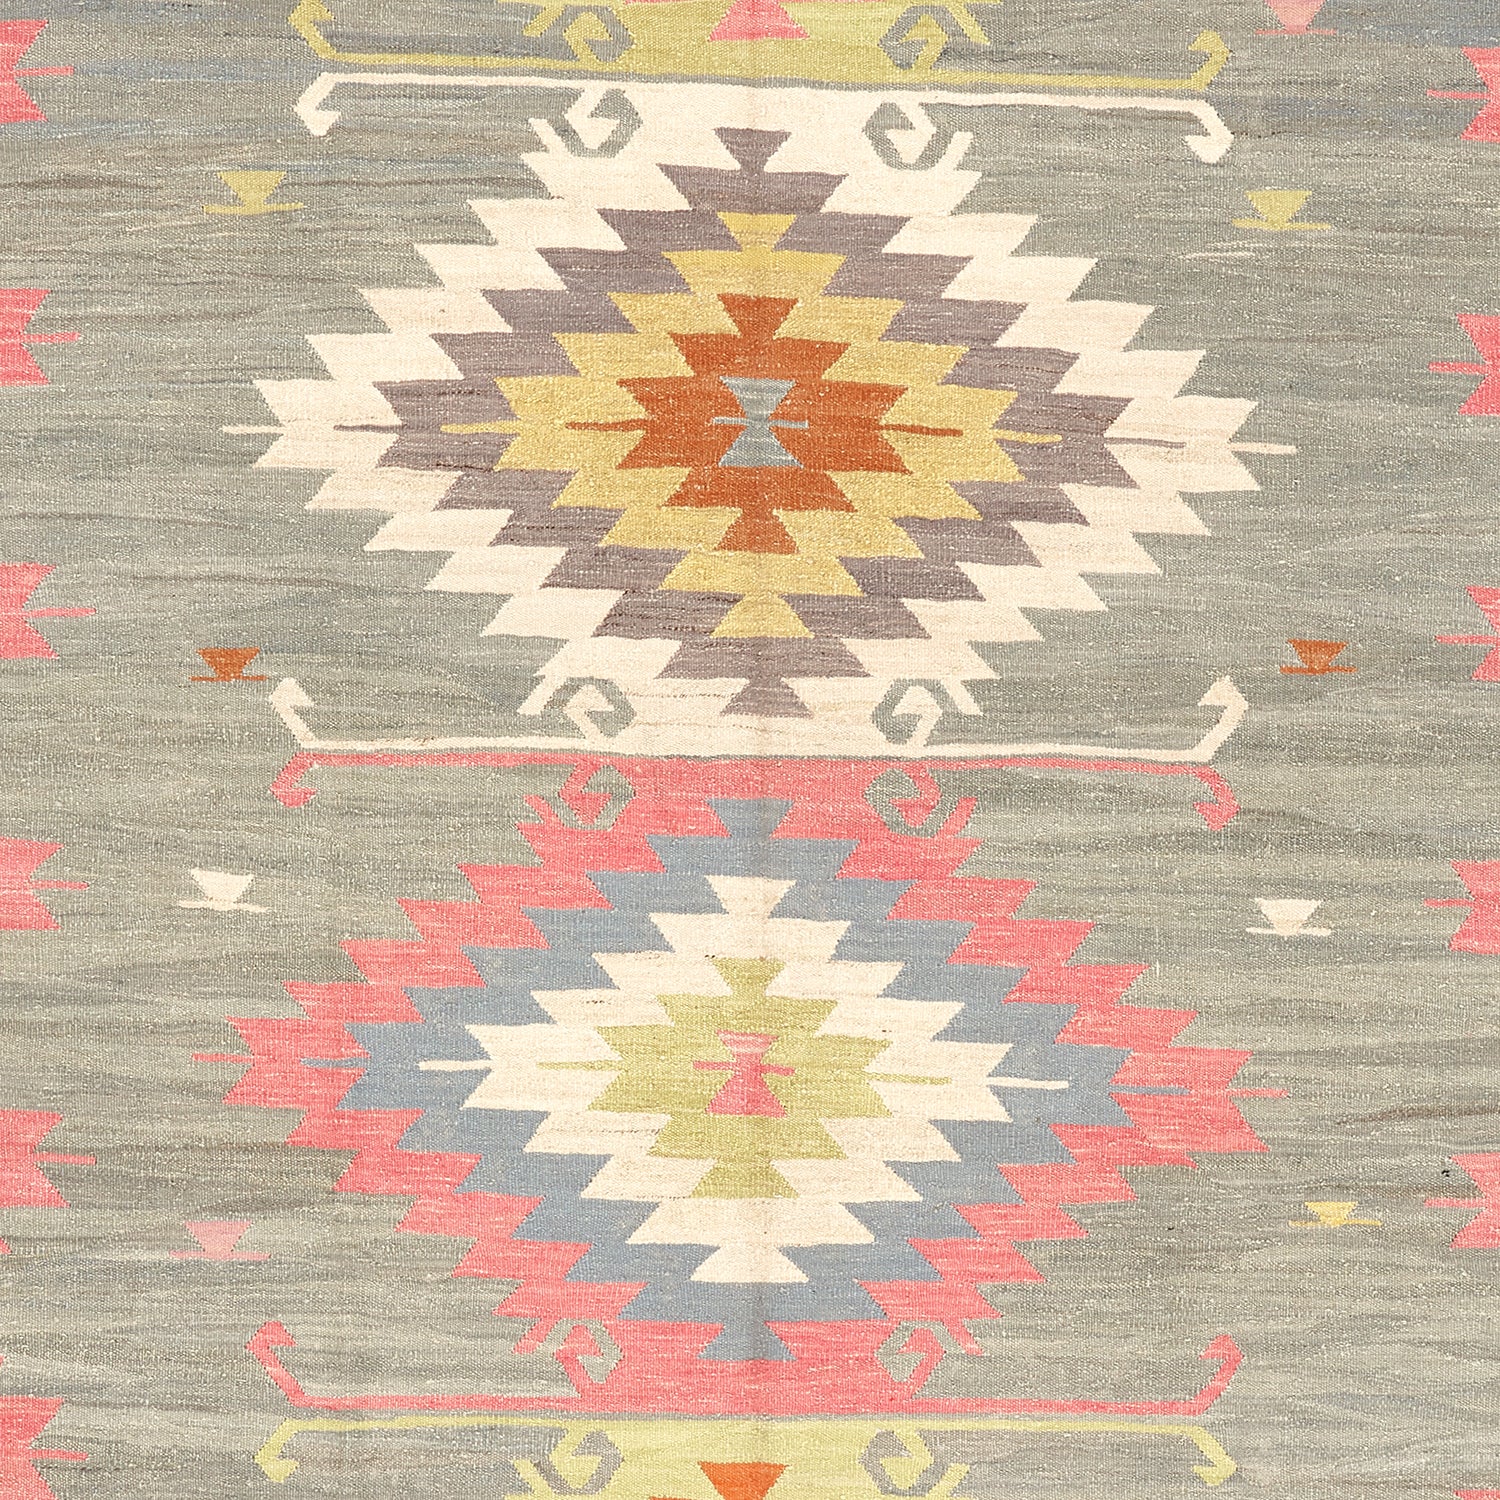 Hand-woven rug showcasing intricate geometric patterns with tribal influences.